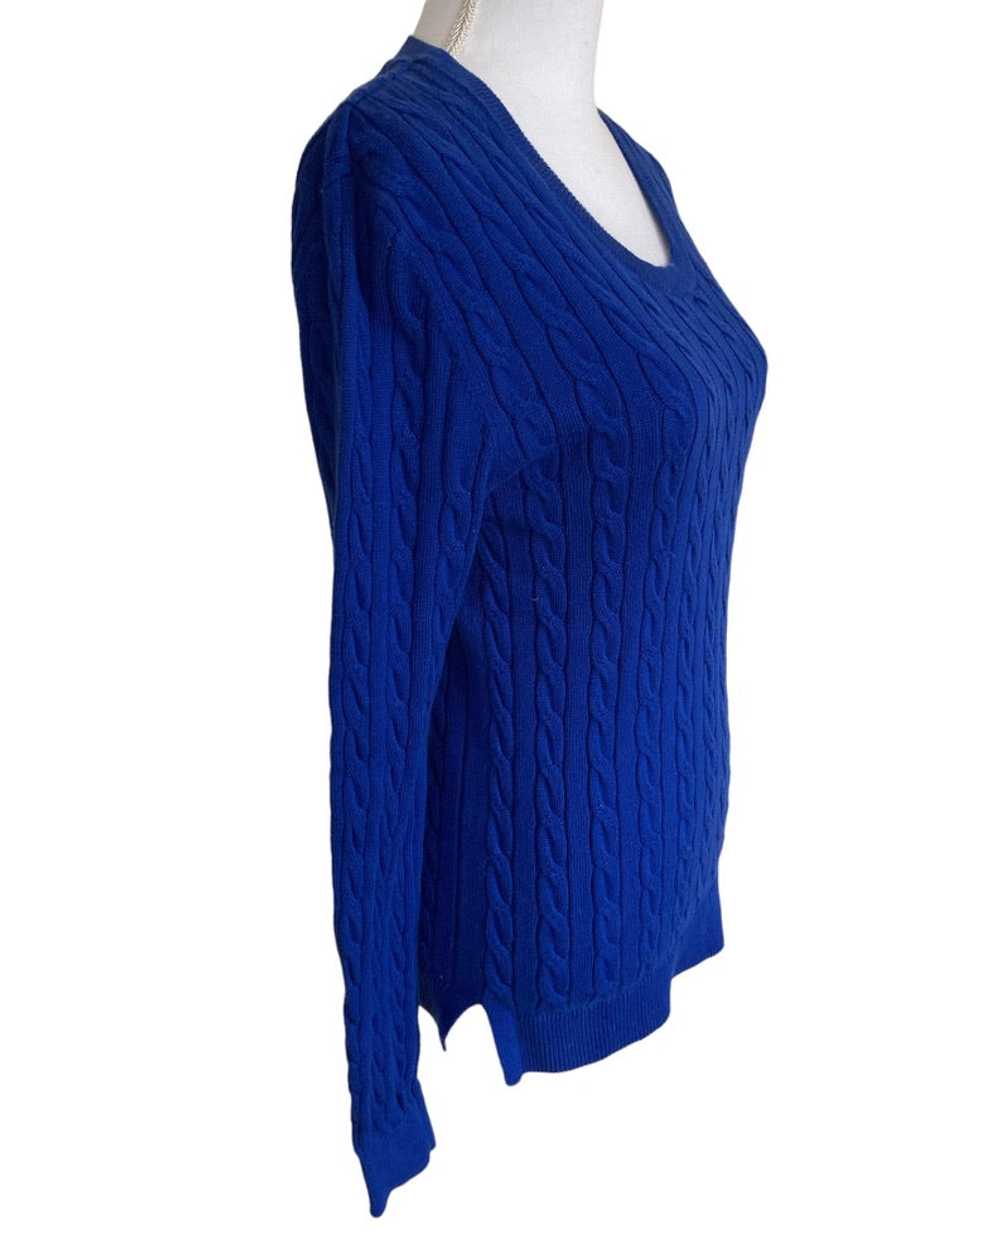 Lacoste Royal Blue Cable Knit Sweater, S - image 2